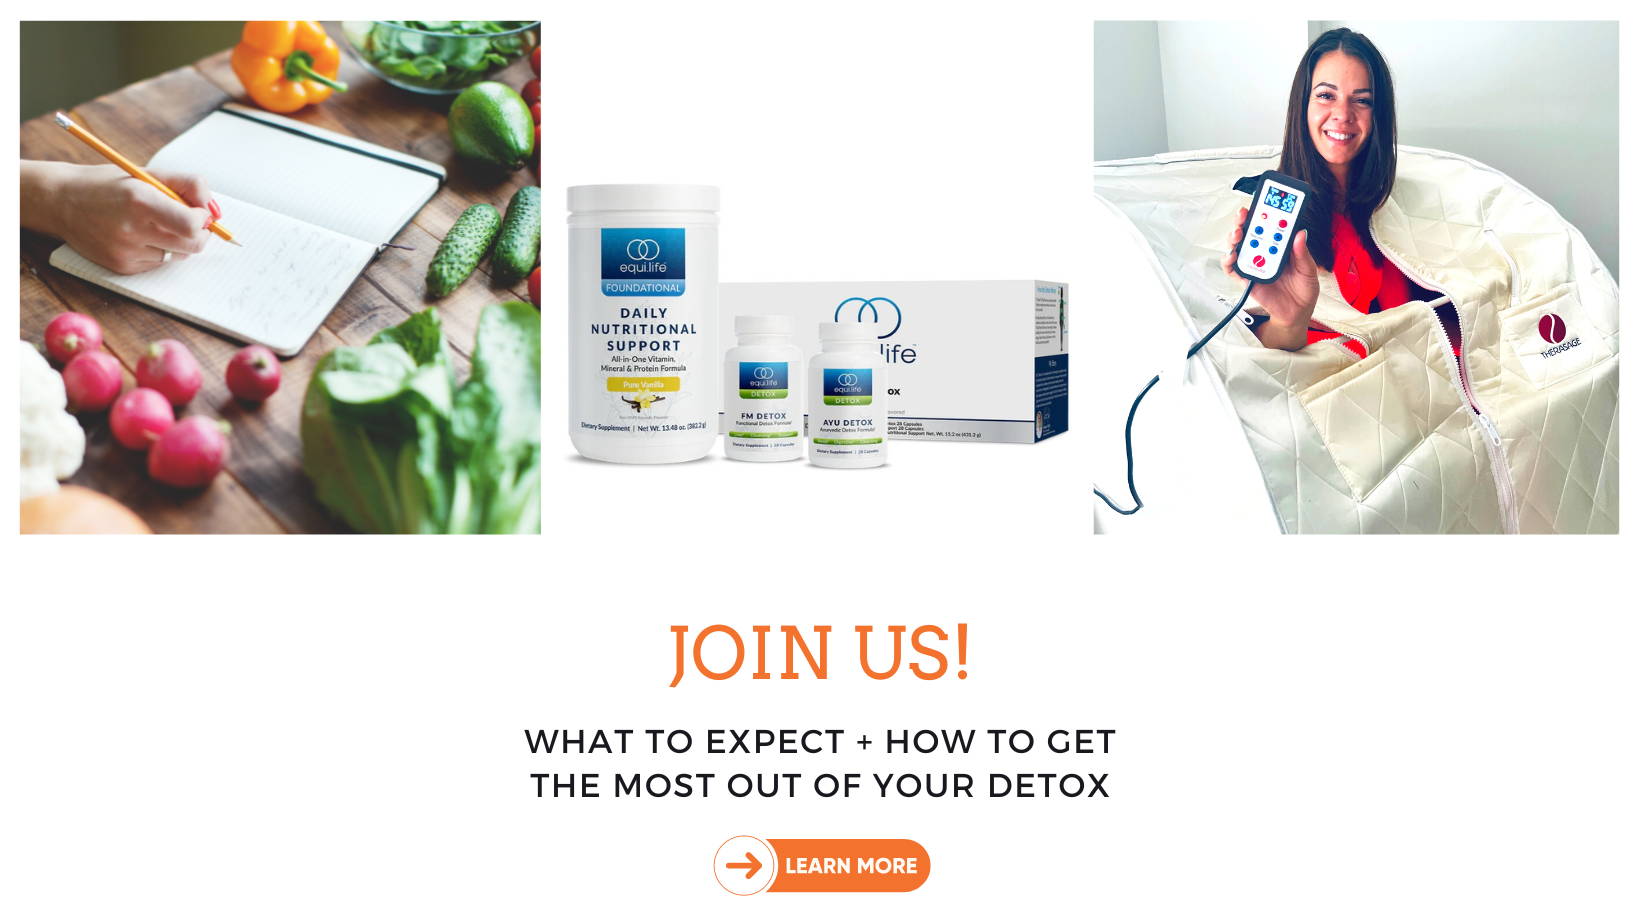 Join Us! What to expect and how to get the most out of your detox